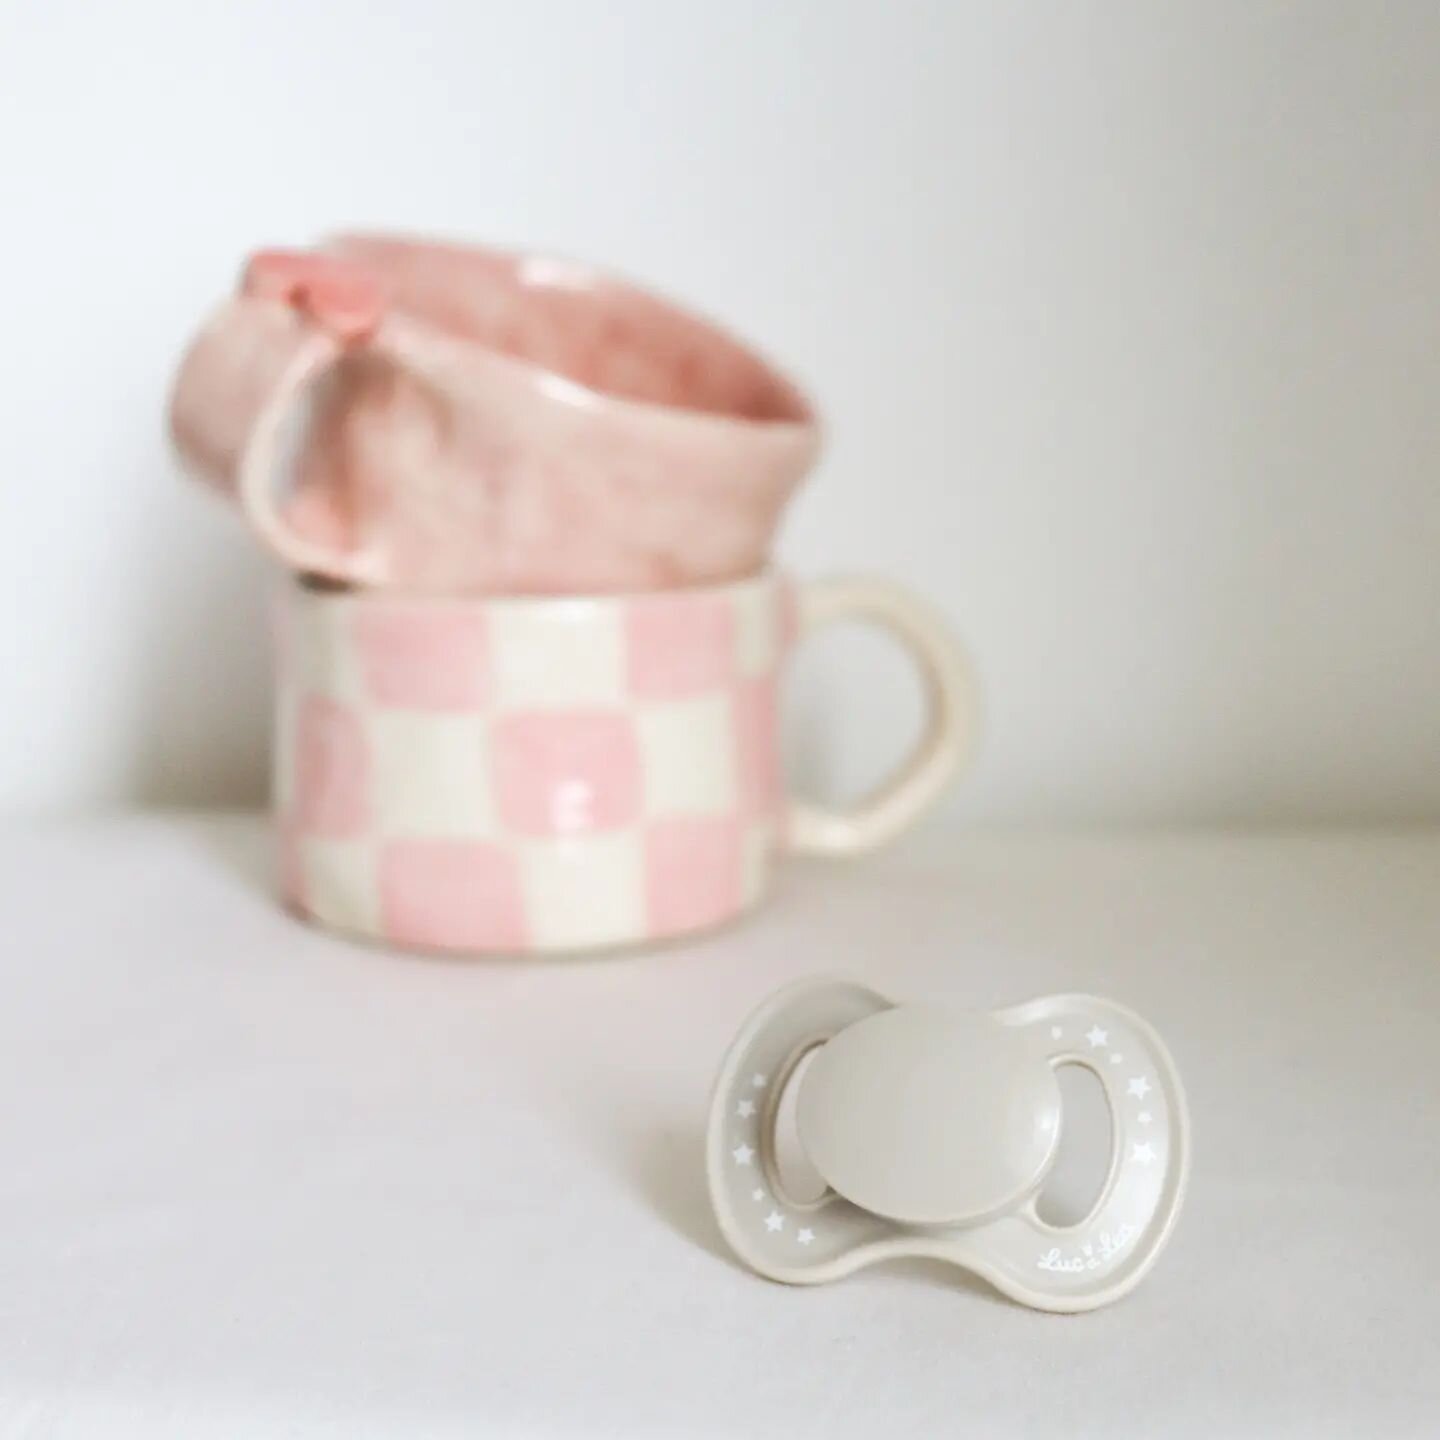 🧸 Hi guys, I've been keeping a little secret from you 🥰. I created Poppy Ceramics when I was 3 months pregnant last winter, and now is the time for me to take a little break (aka maternity leave 💕) to enjoy this magical time👼🏼. Creating a compan